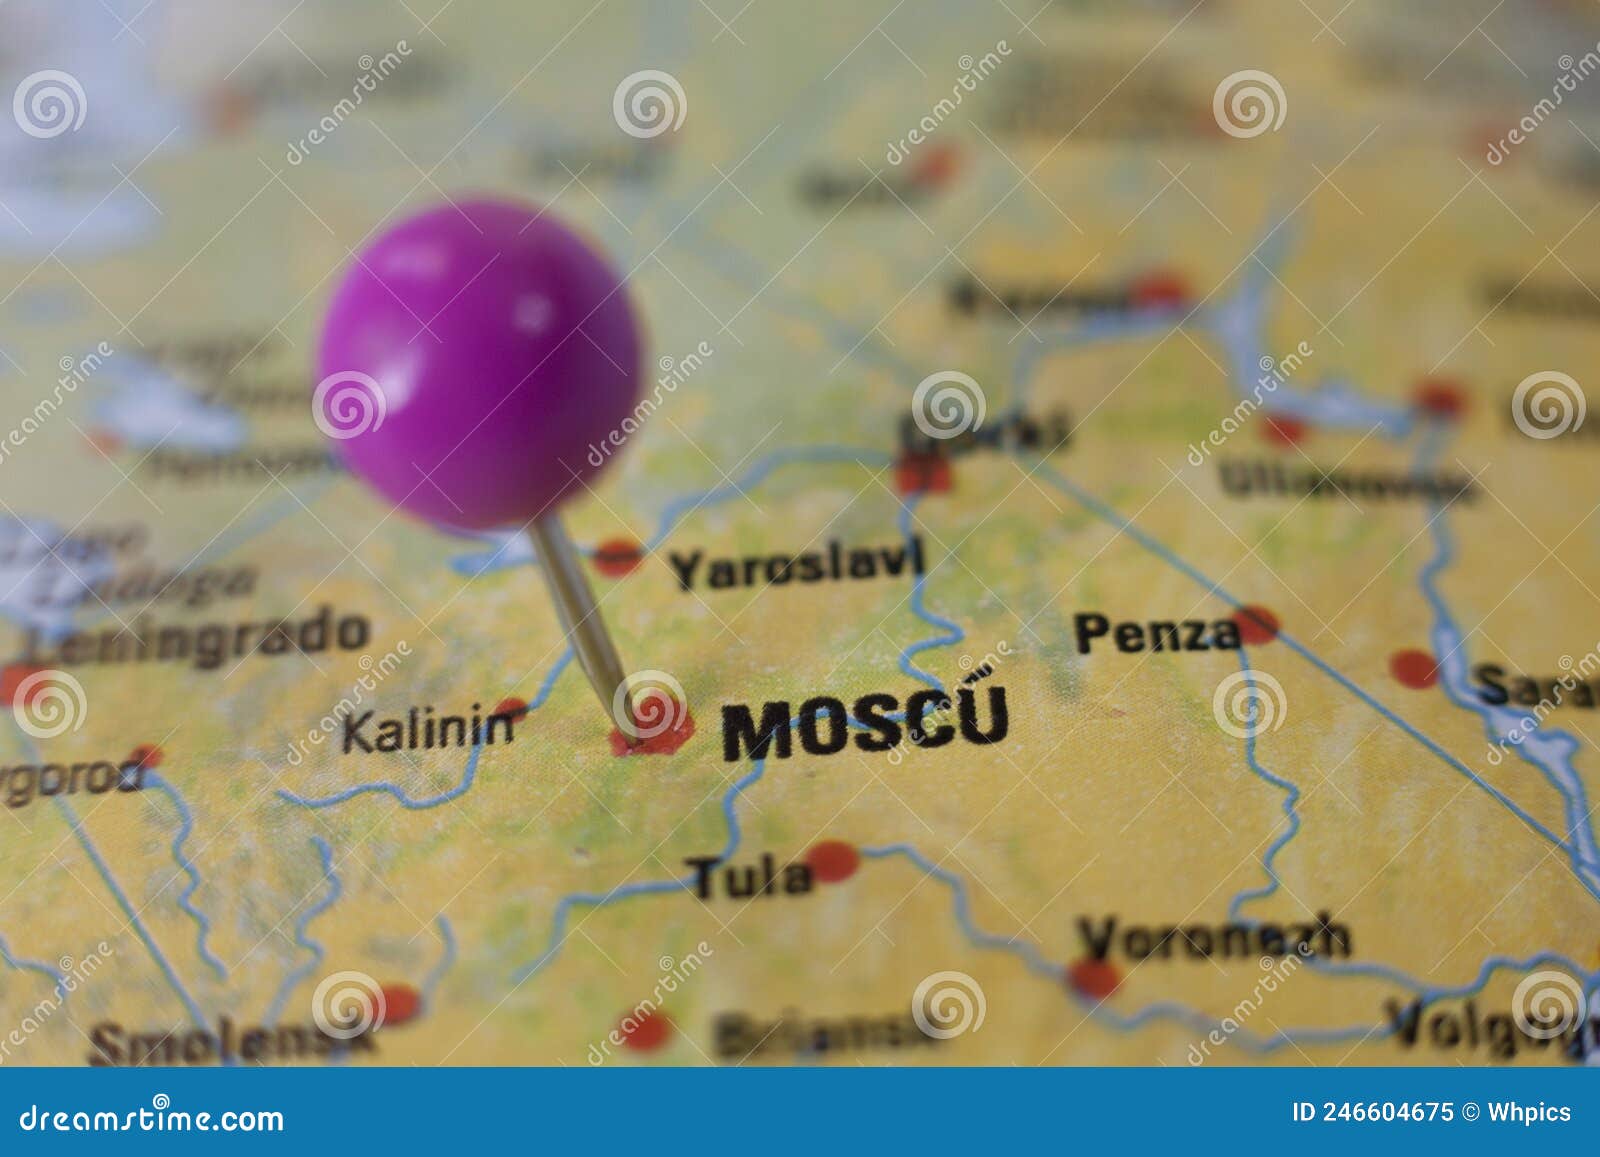 pushpin marking on moscow, moscu in spanish